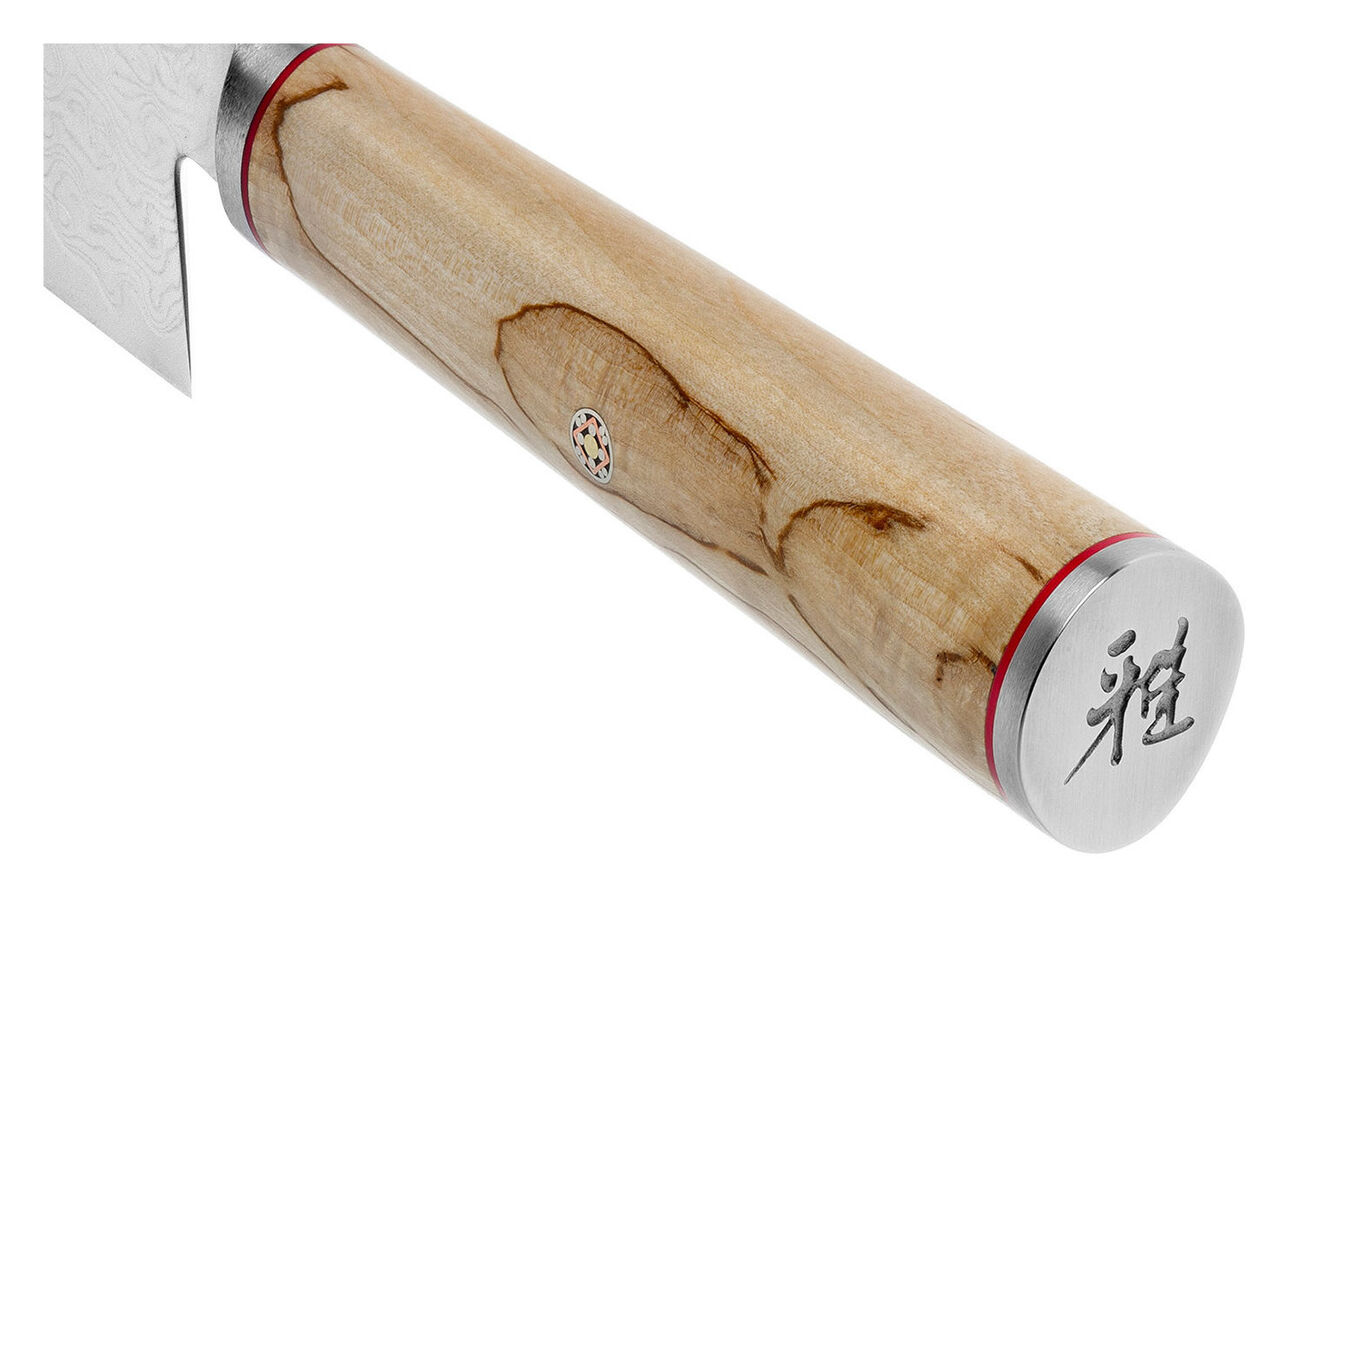 3.5-inch birch Paring Knife,,large 2